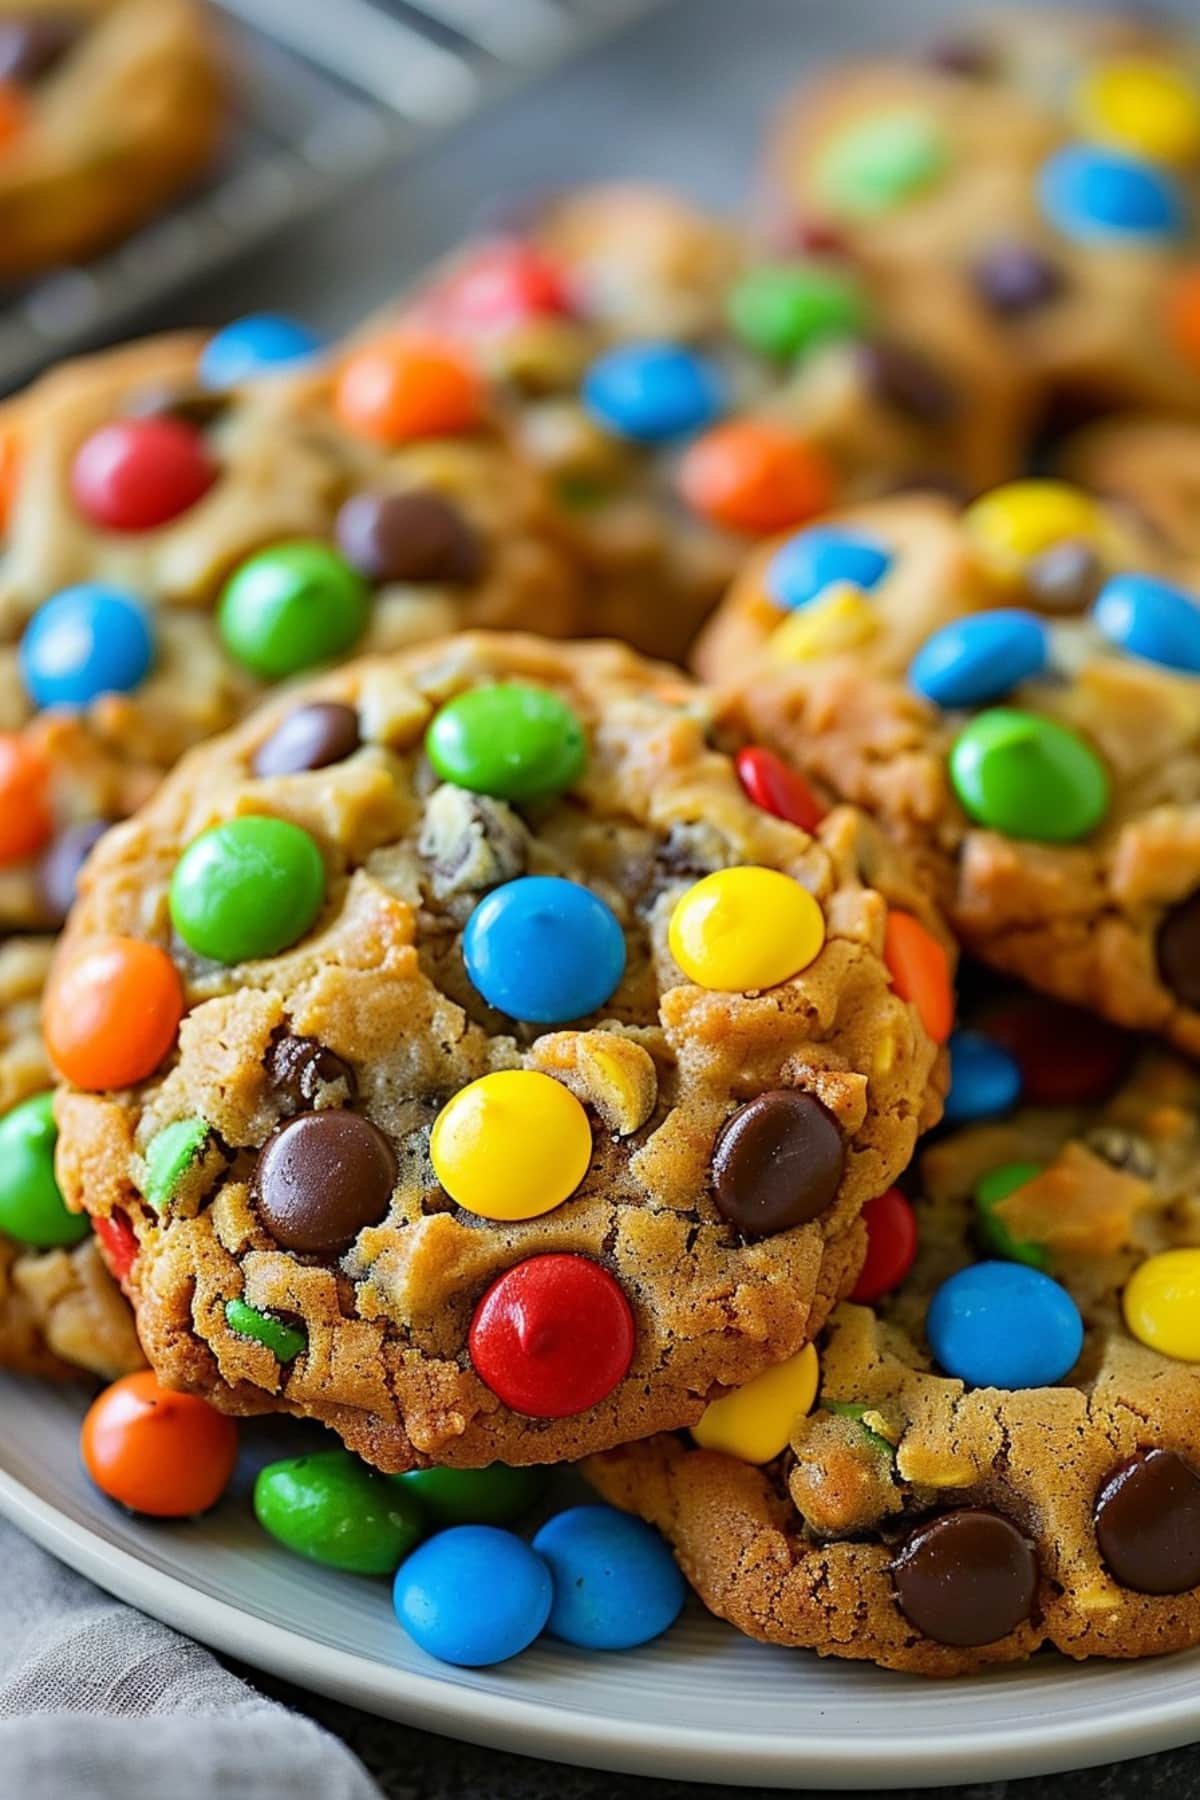 Freshly baked monster cookies, a crunchy and chewy snack or dessert